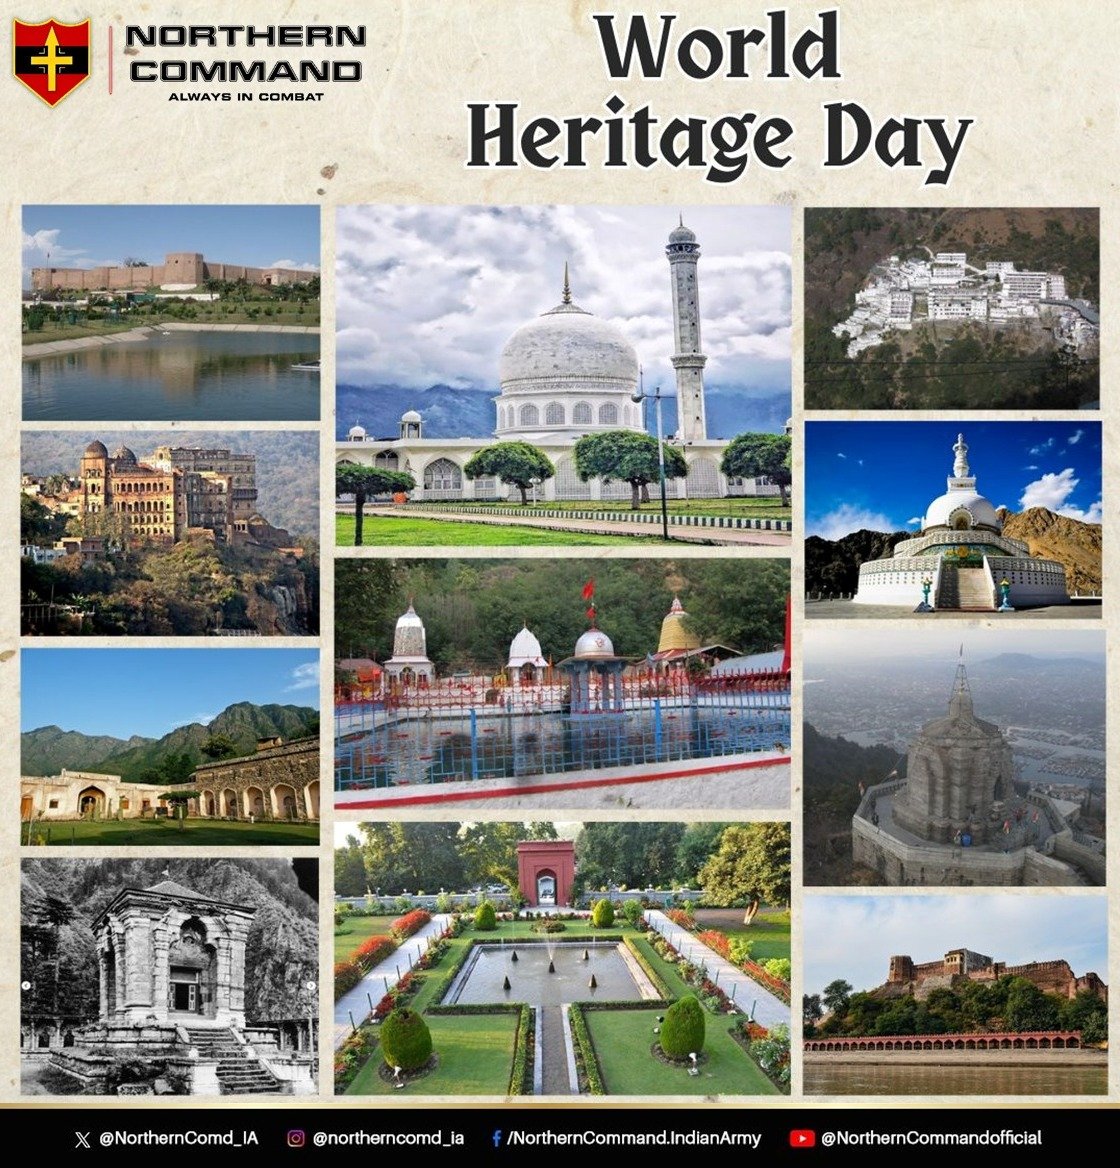 #Agnipathscheme
#JammuAndKashmir : A land of rich & vast cultural heritage & diversity; a testimony of our glorious past.  

#WorldHeritageDay 
#ShiningJK
#DhruvaCommand